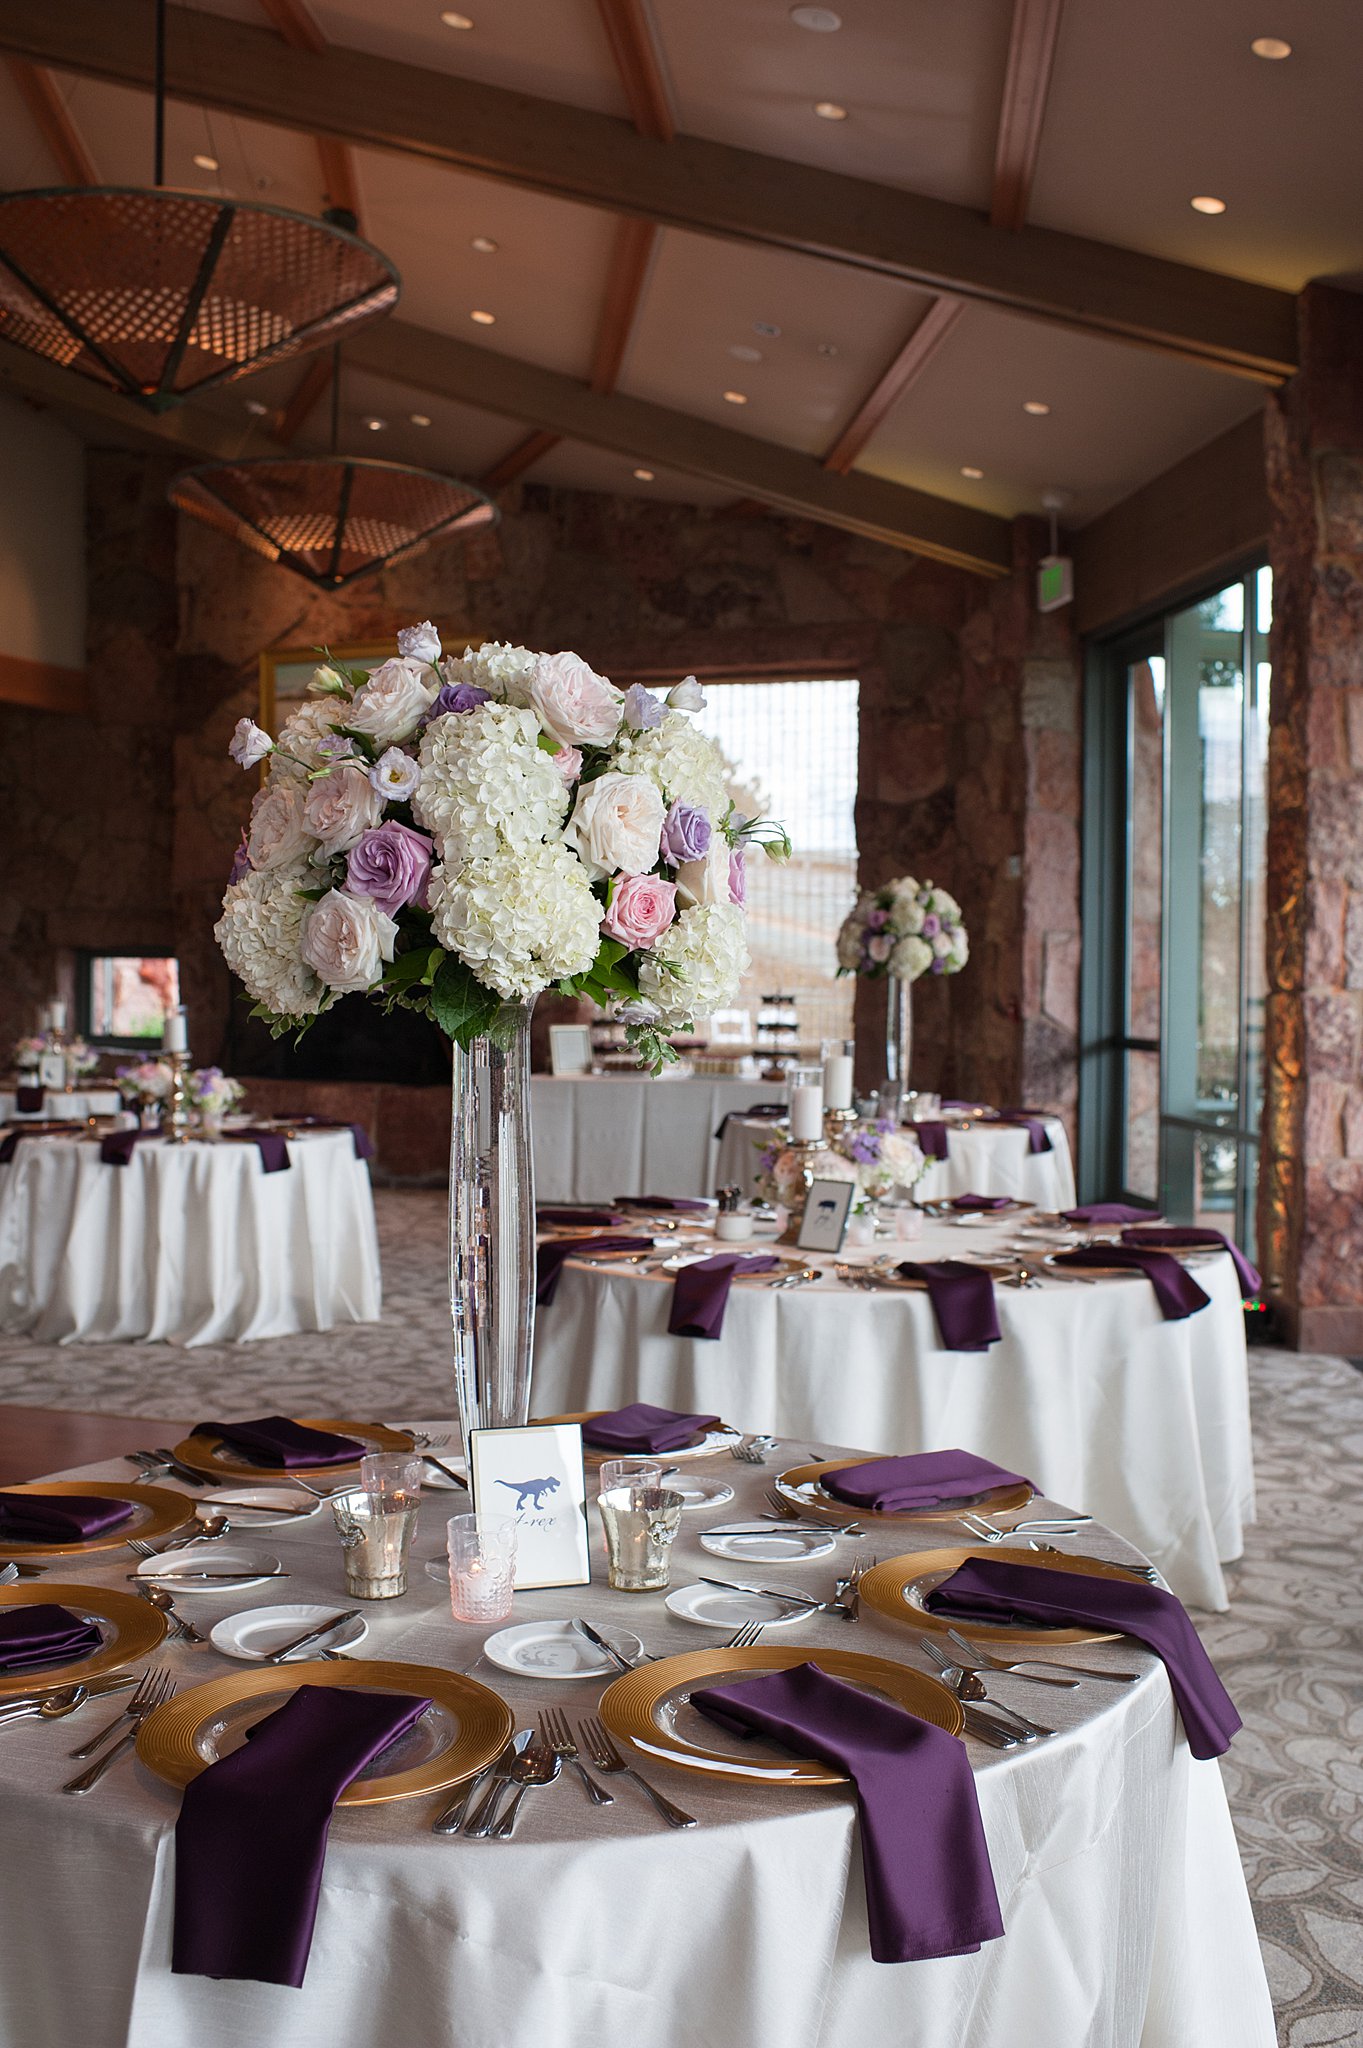 Details of a wedding reception table set up with purple napkins